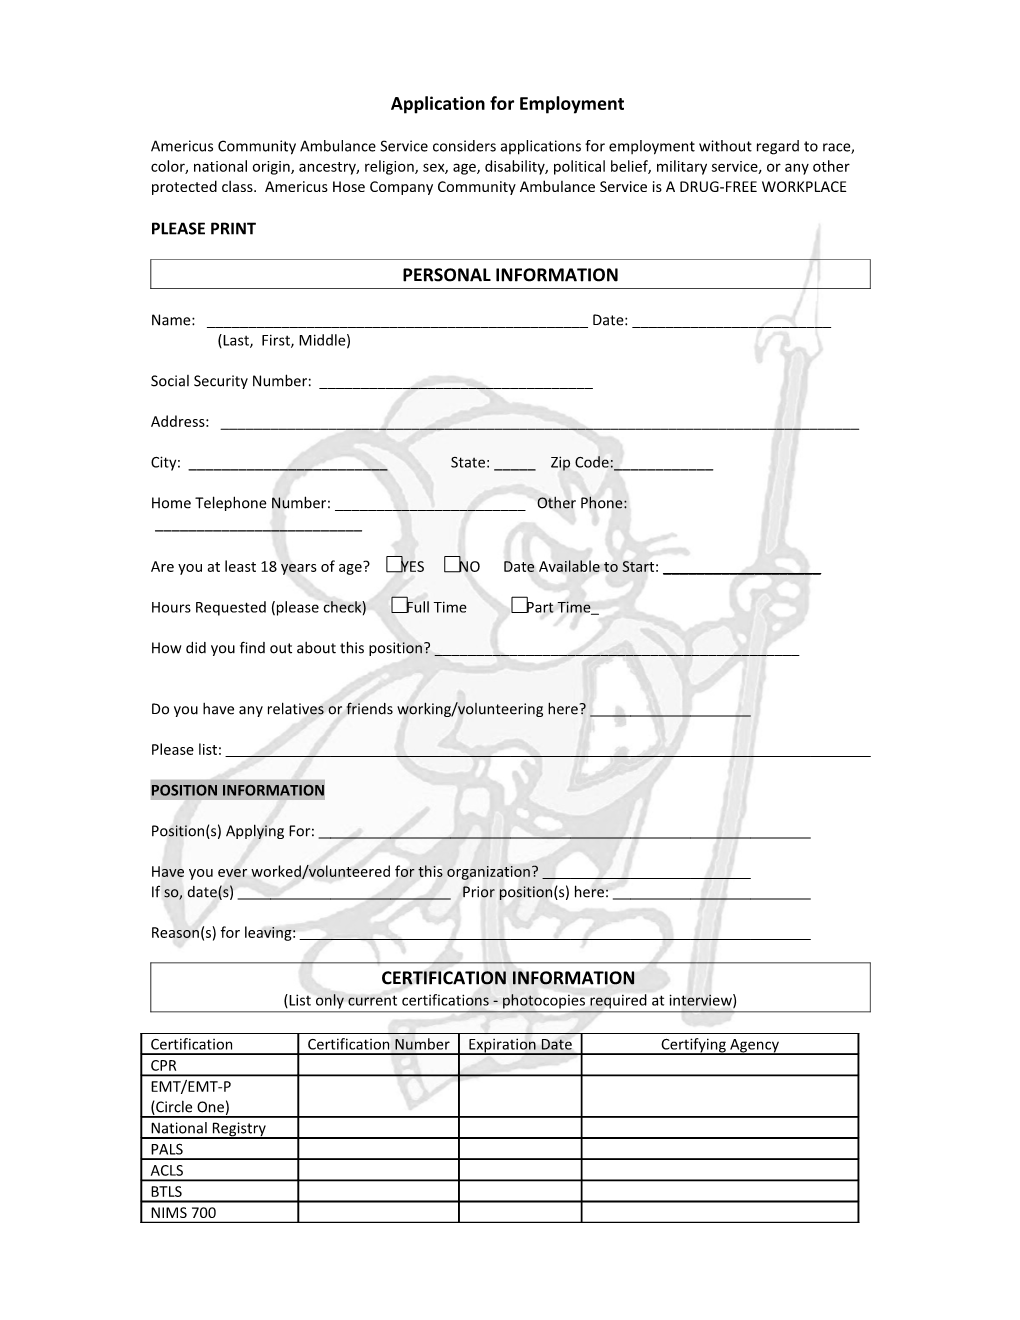 Application for Employment s19